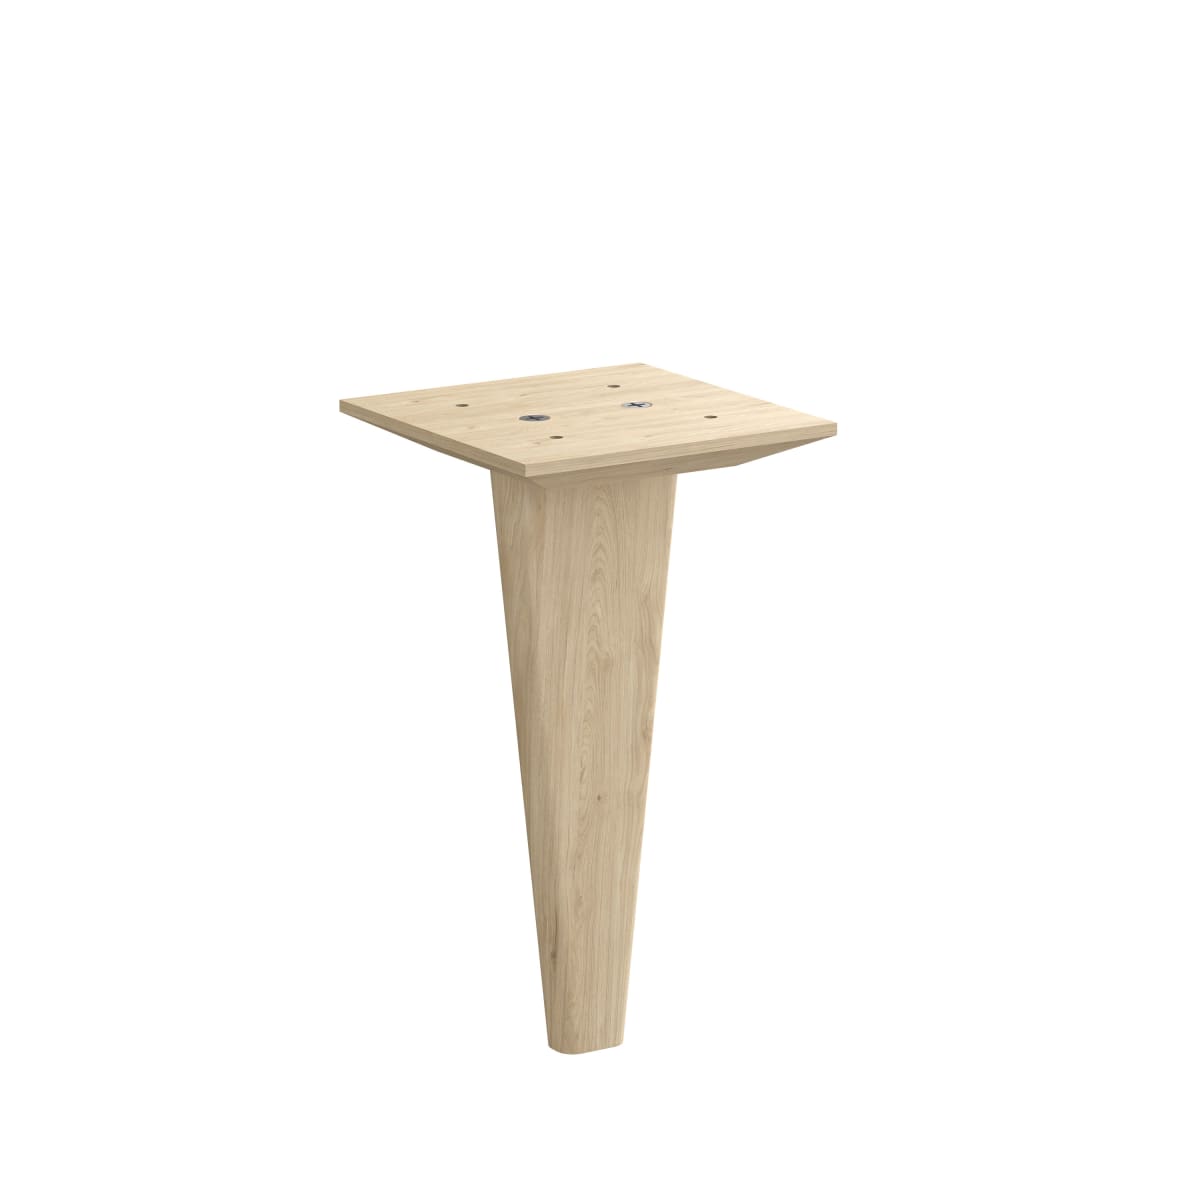 SPACEO KUB CENTRE FOOT H21.6CM IN ROUGH PINE - best price from Maltashopper.com BR410005645